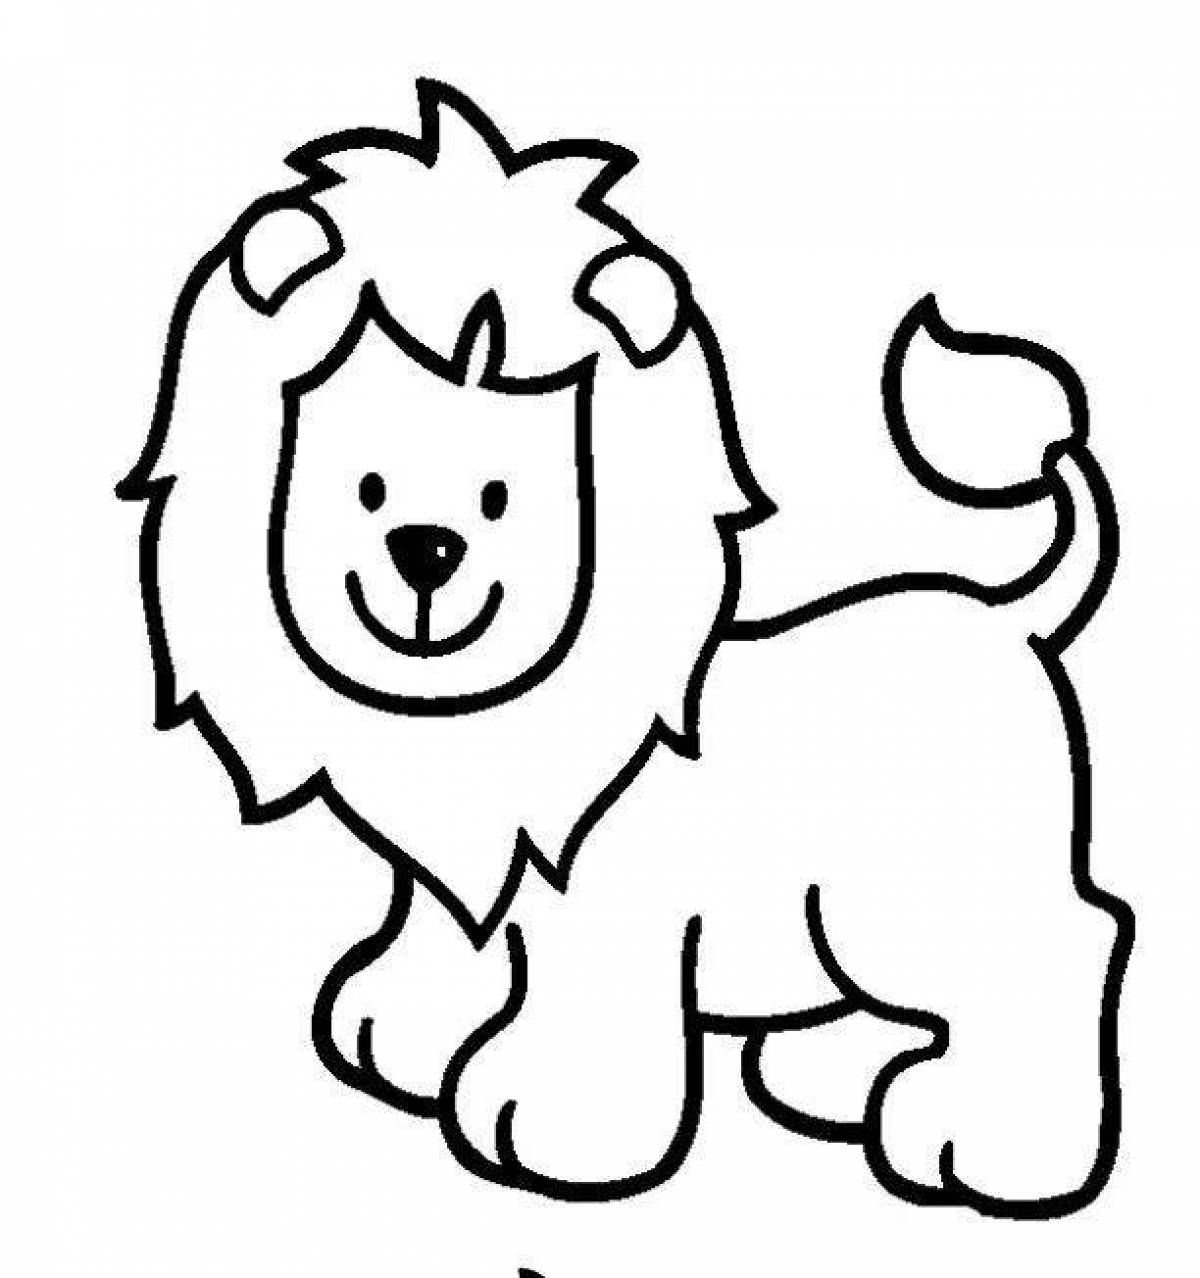 Coloring dazzling lion for kids